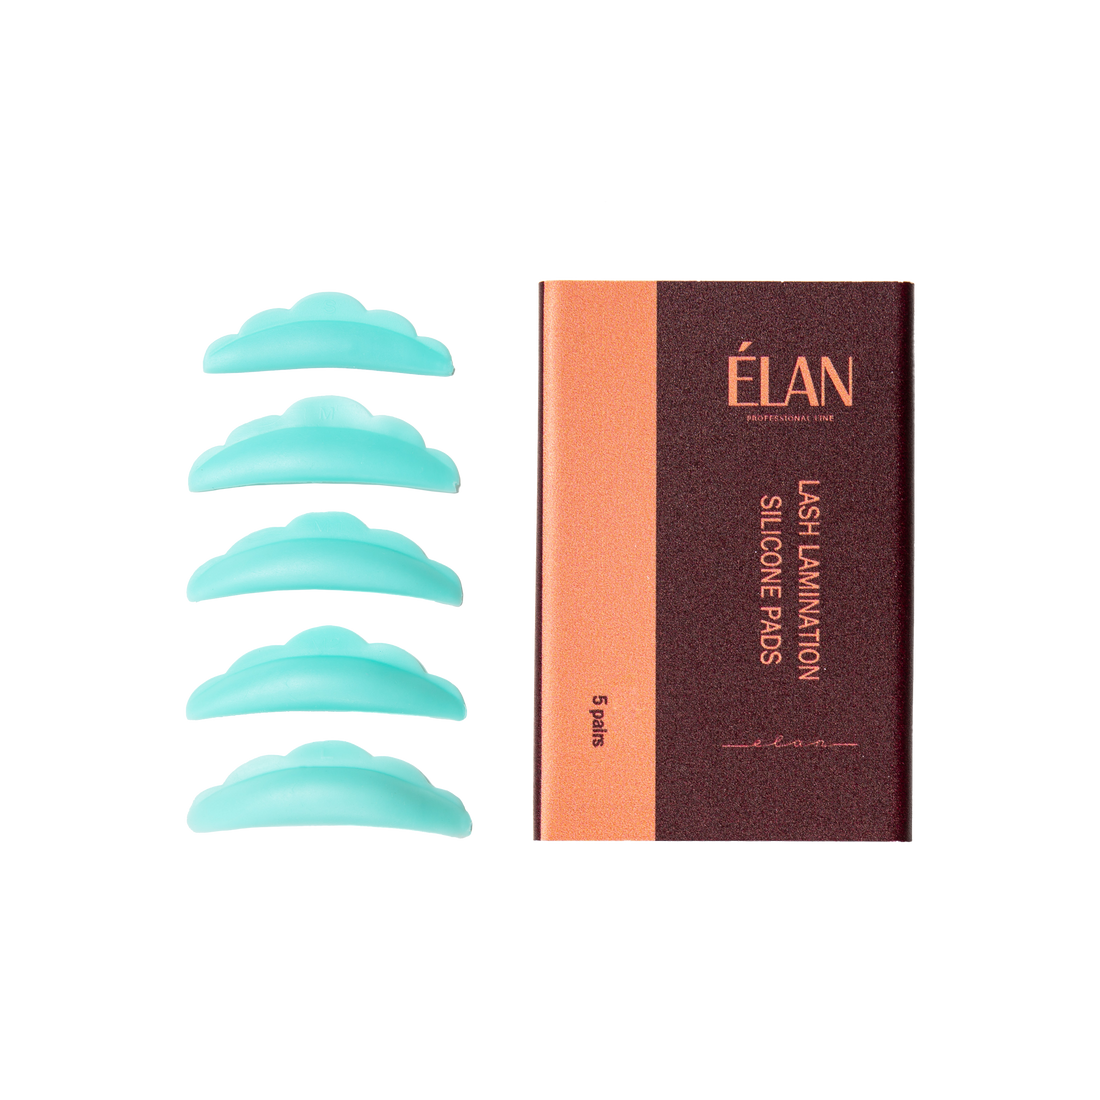 ÉLAN - Silicone Pads for lash lifts - (Size M, 5 pairs)